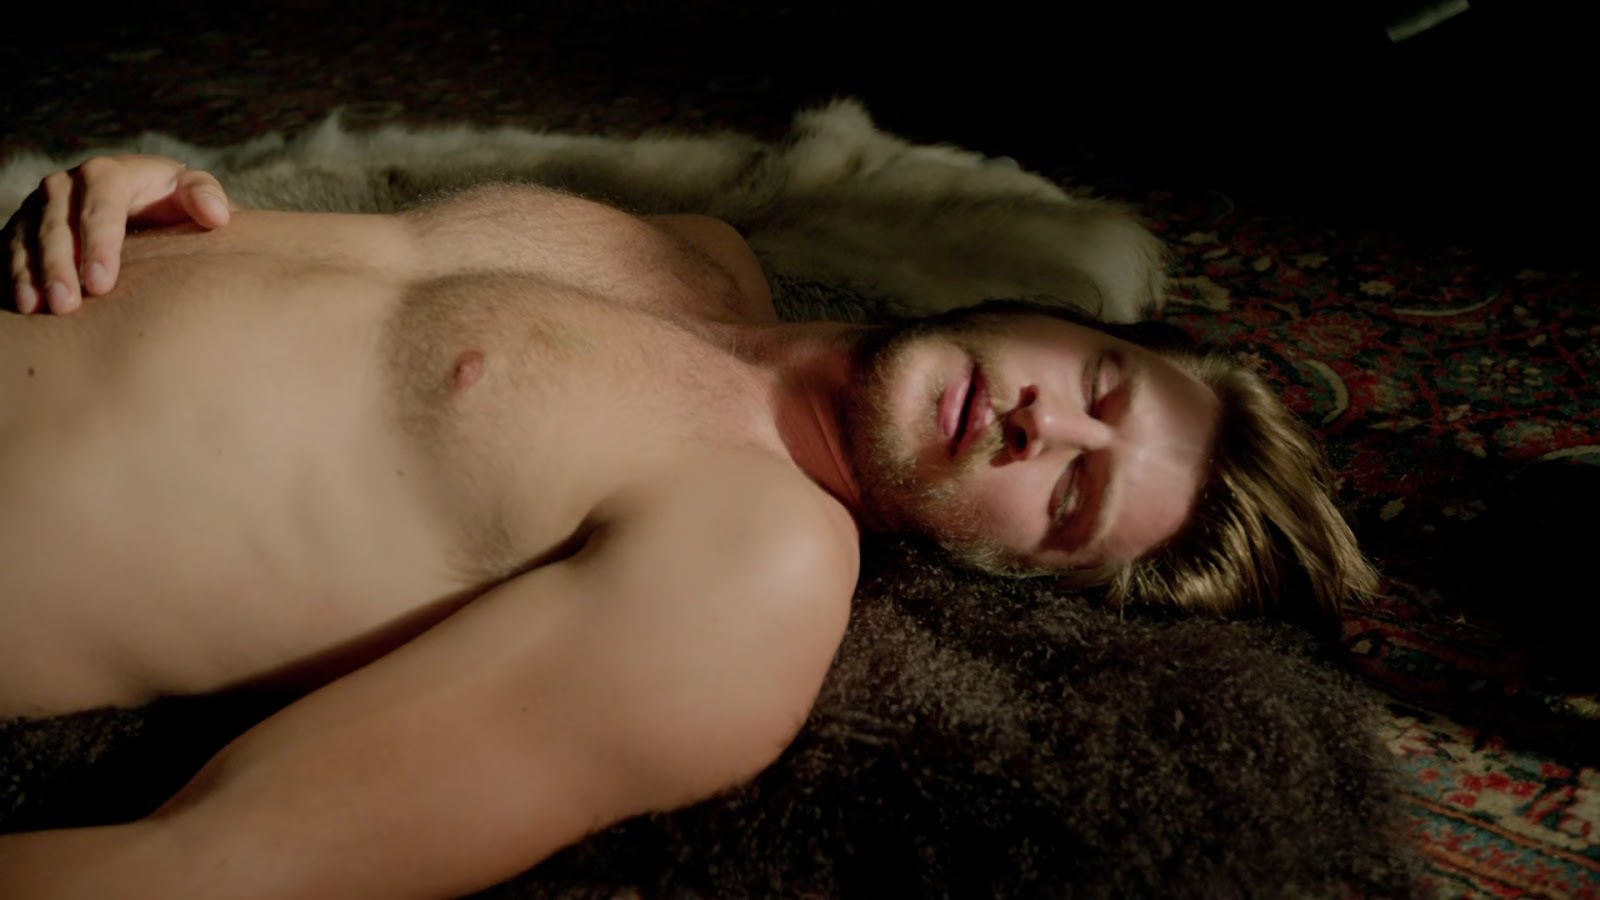 Paul greene nude - 🧡 Shirtless Men On The Blog: Greyston Holt Mostra Il Se...